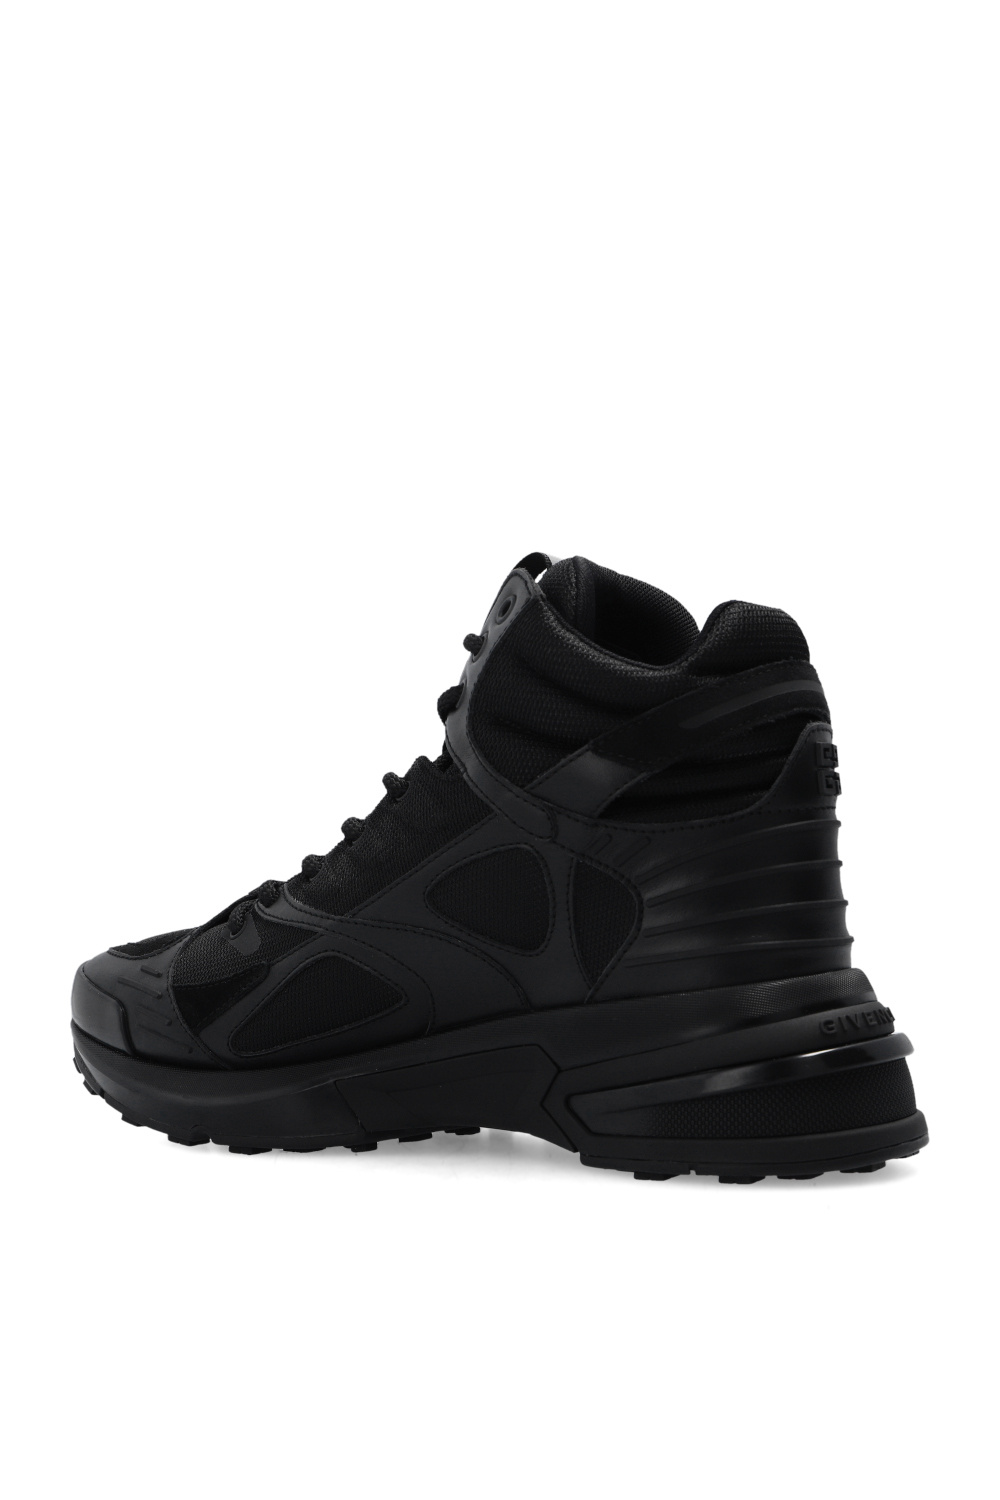 Givenchy ‘GIV 1 TR’ sneakers | Men's Shoes | Vitkac